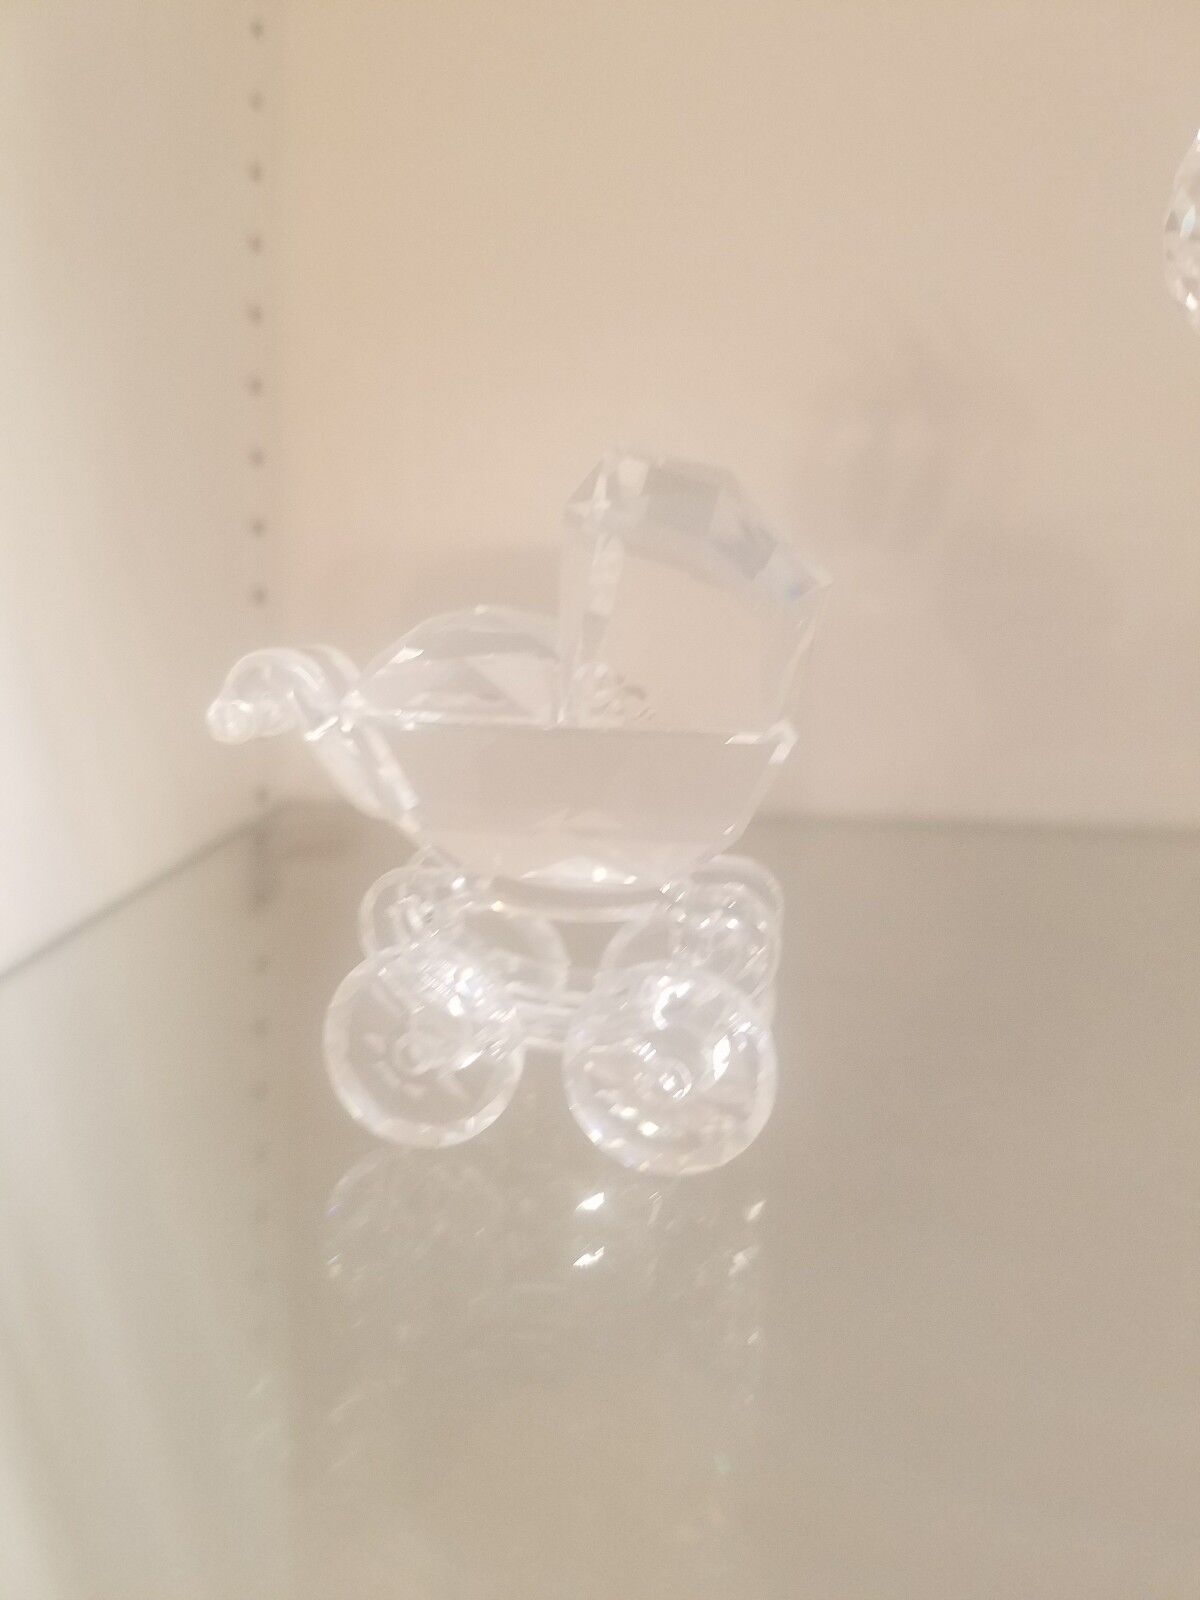 Swarovski Clear Crystal Figurine of a Baby Carriage with box